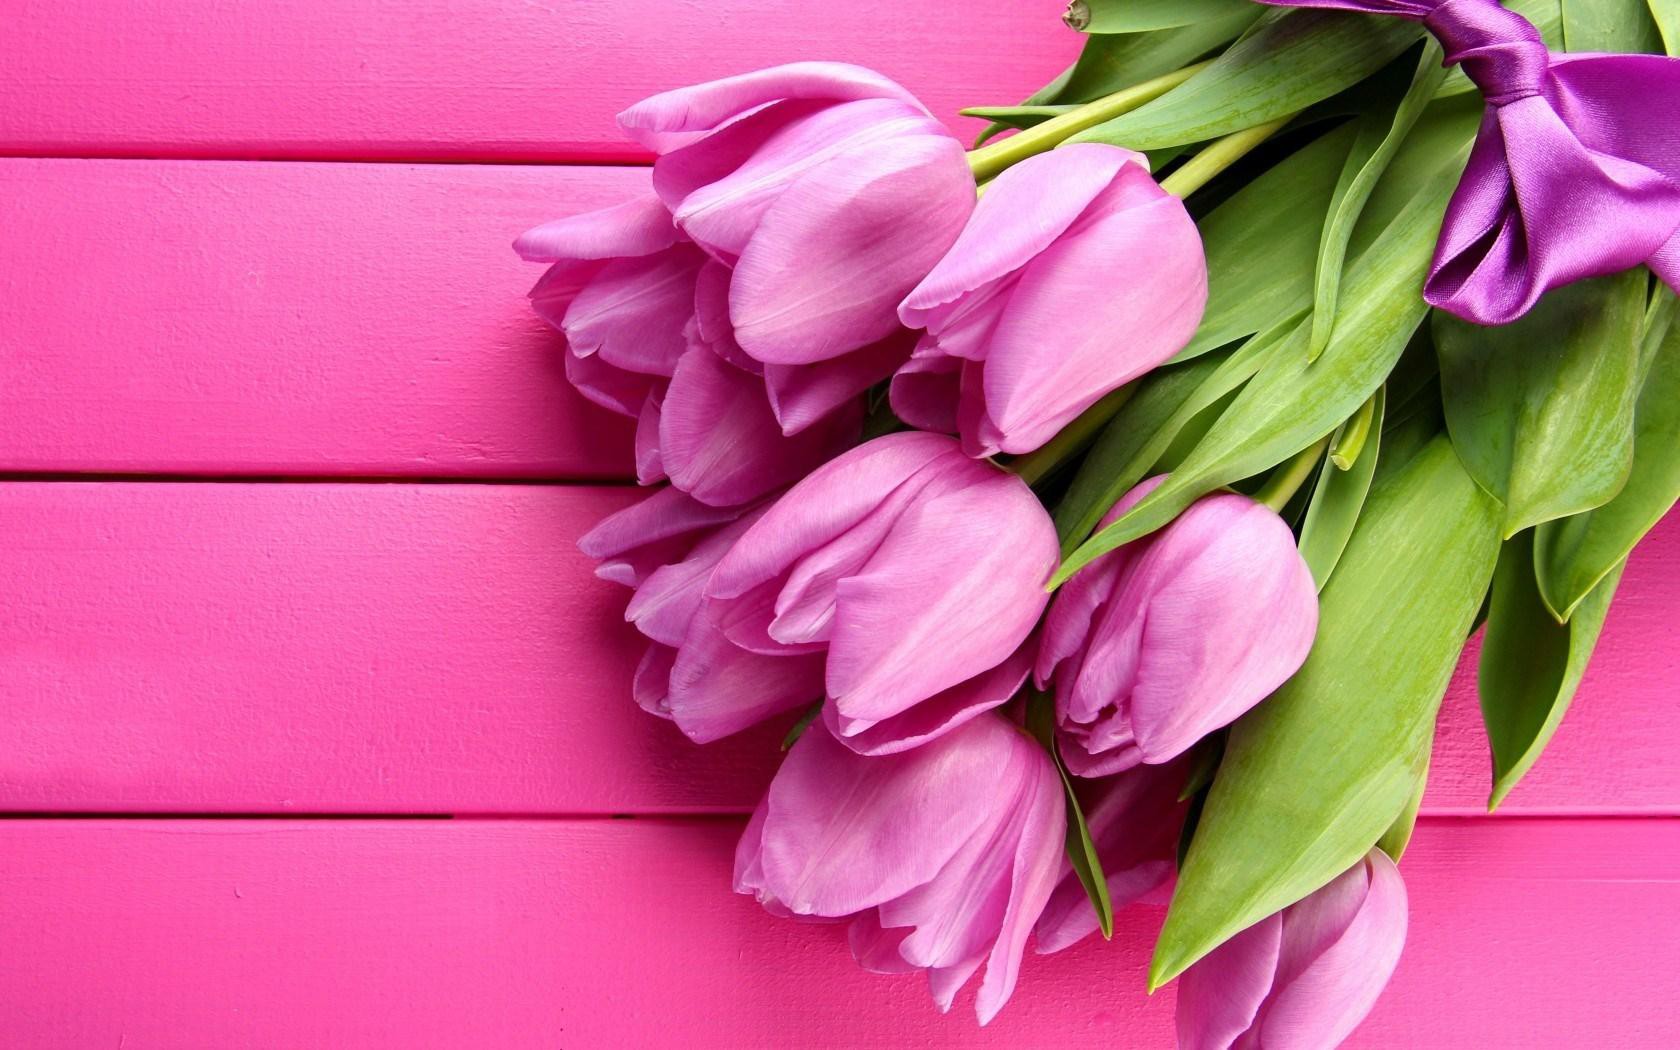 Flowers Spring Lovey Pink Tulips HD Wallpaper New